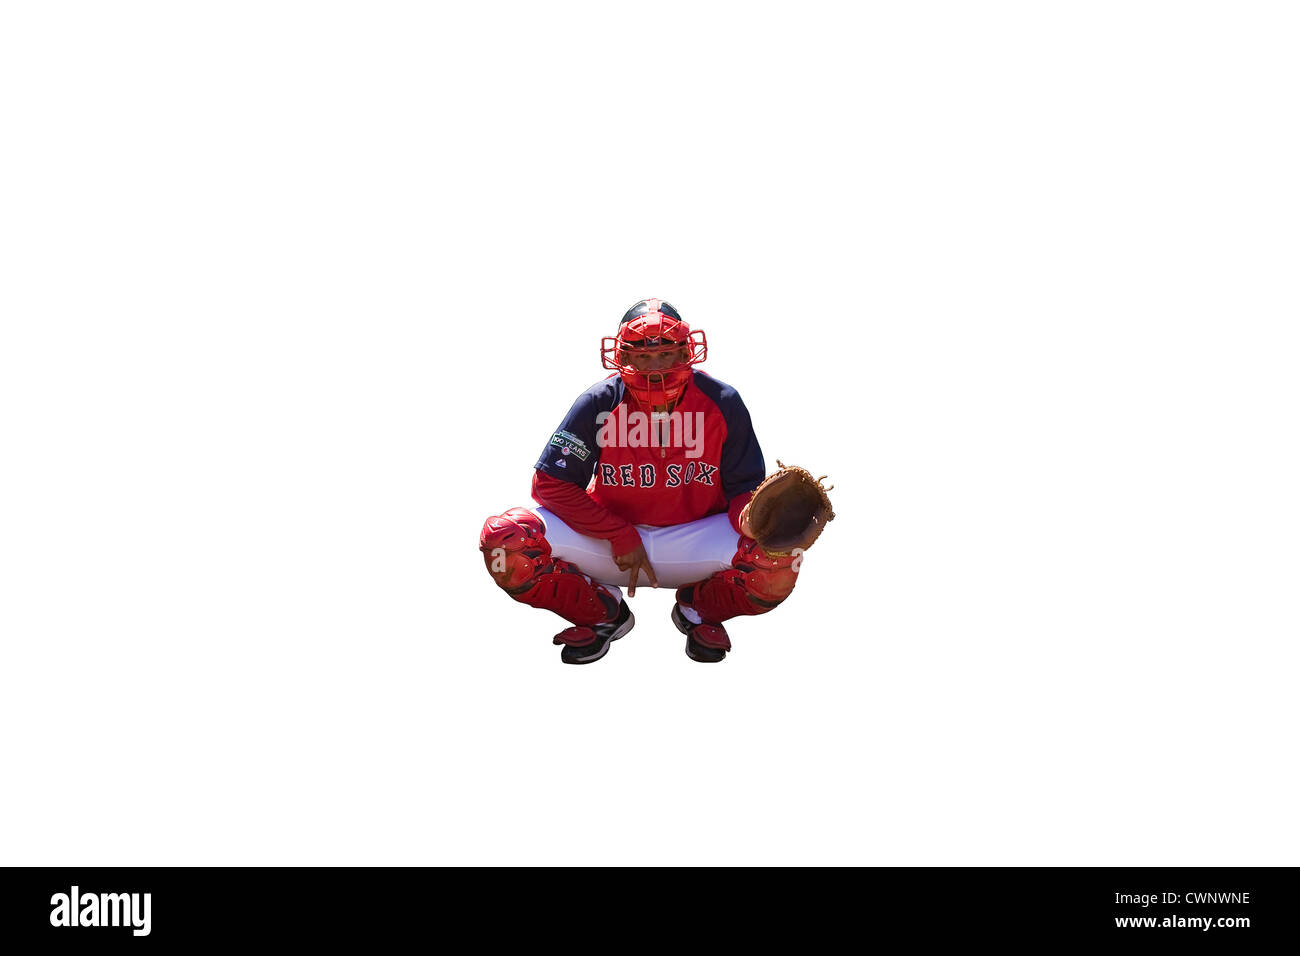 Cut Out. Boston Red Sox Catcher with Catcher's Mitt showing a 'deuce' or a two finger sign between his legs on white background. Stock Photo